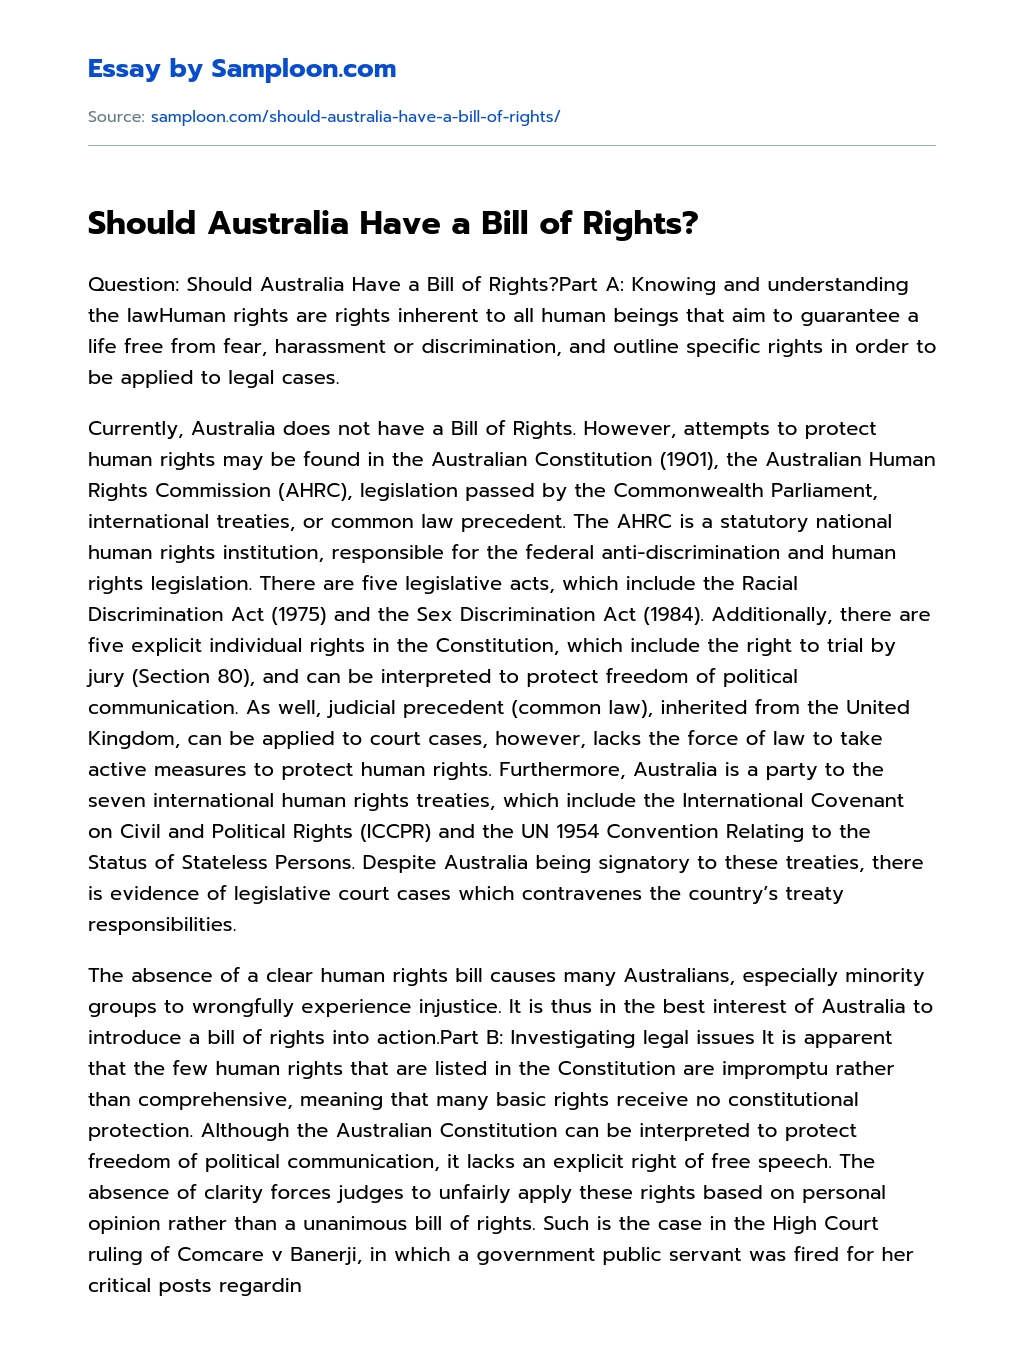 Should Australia Have a Bill of Rights? essay